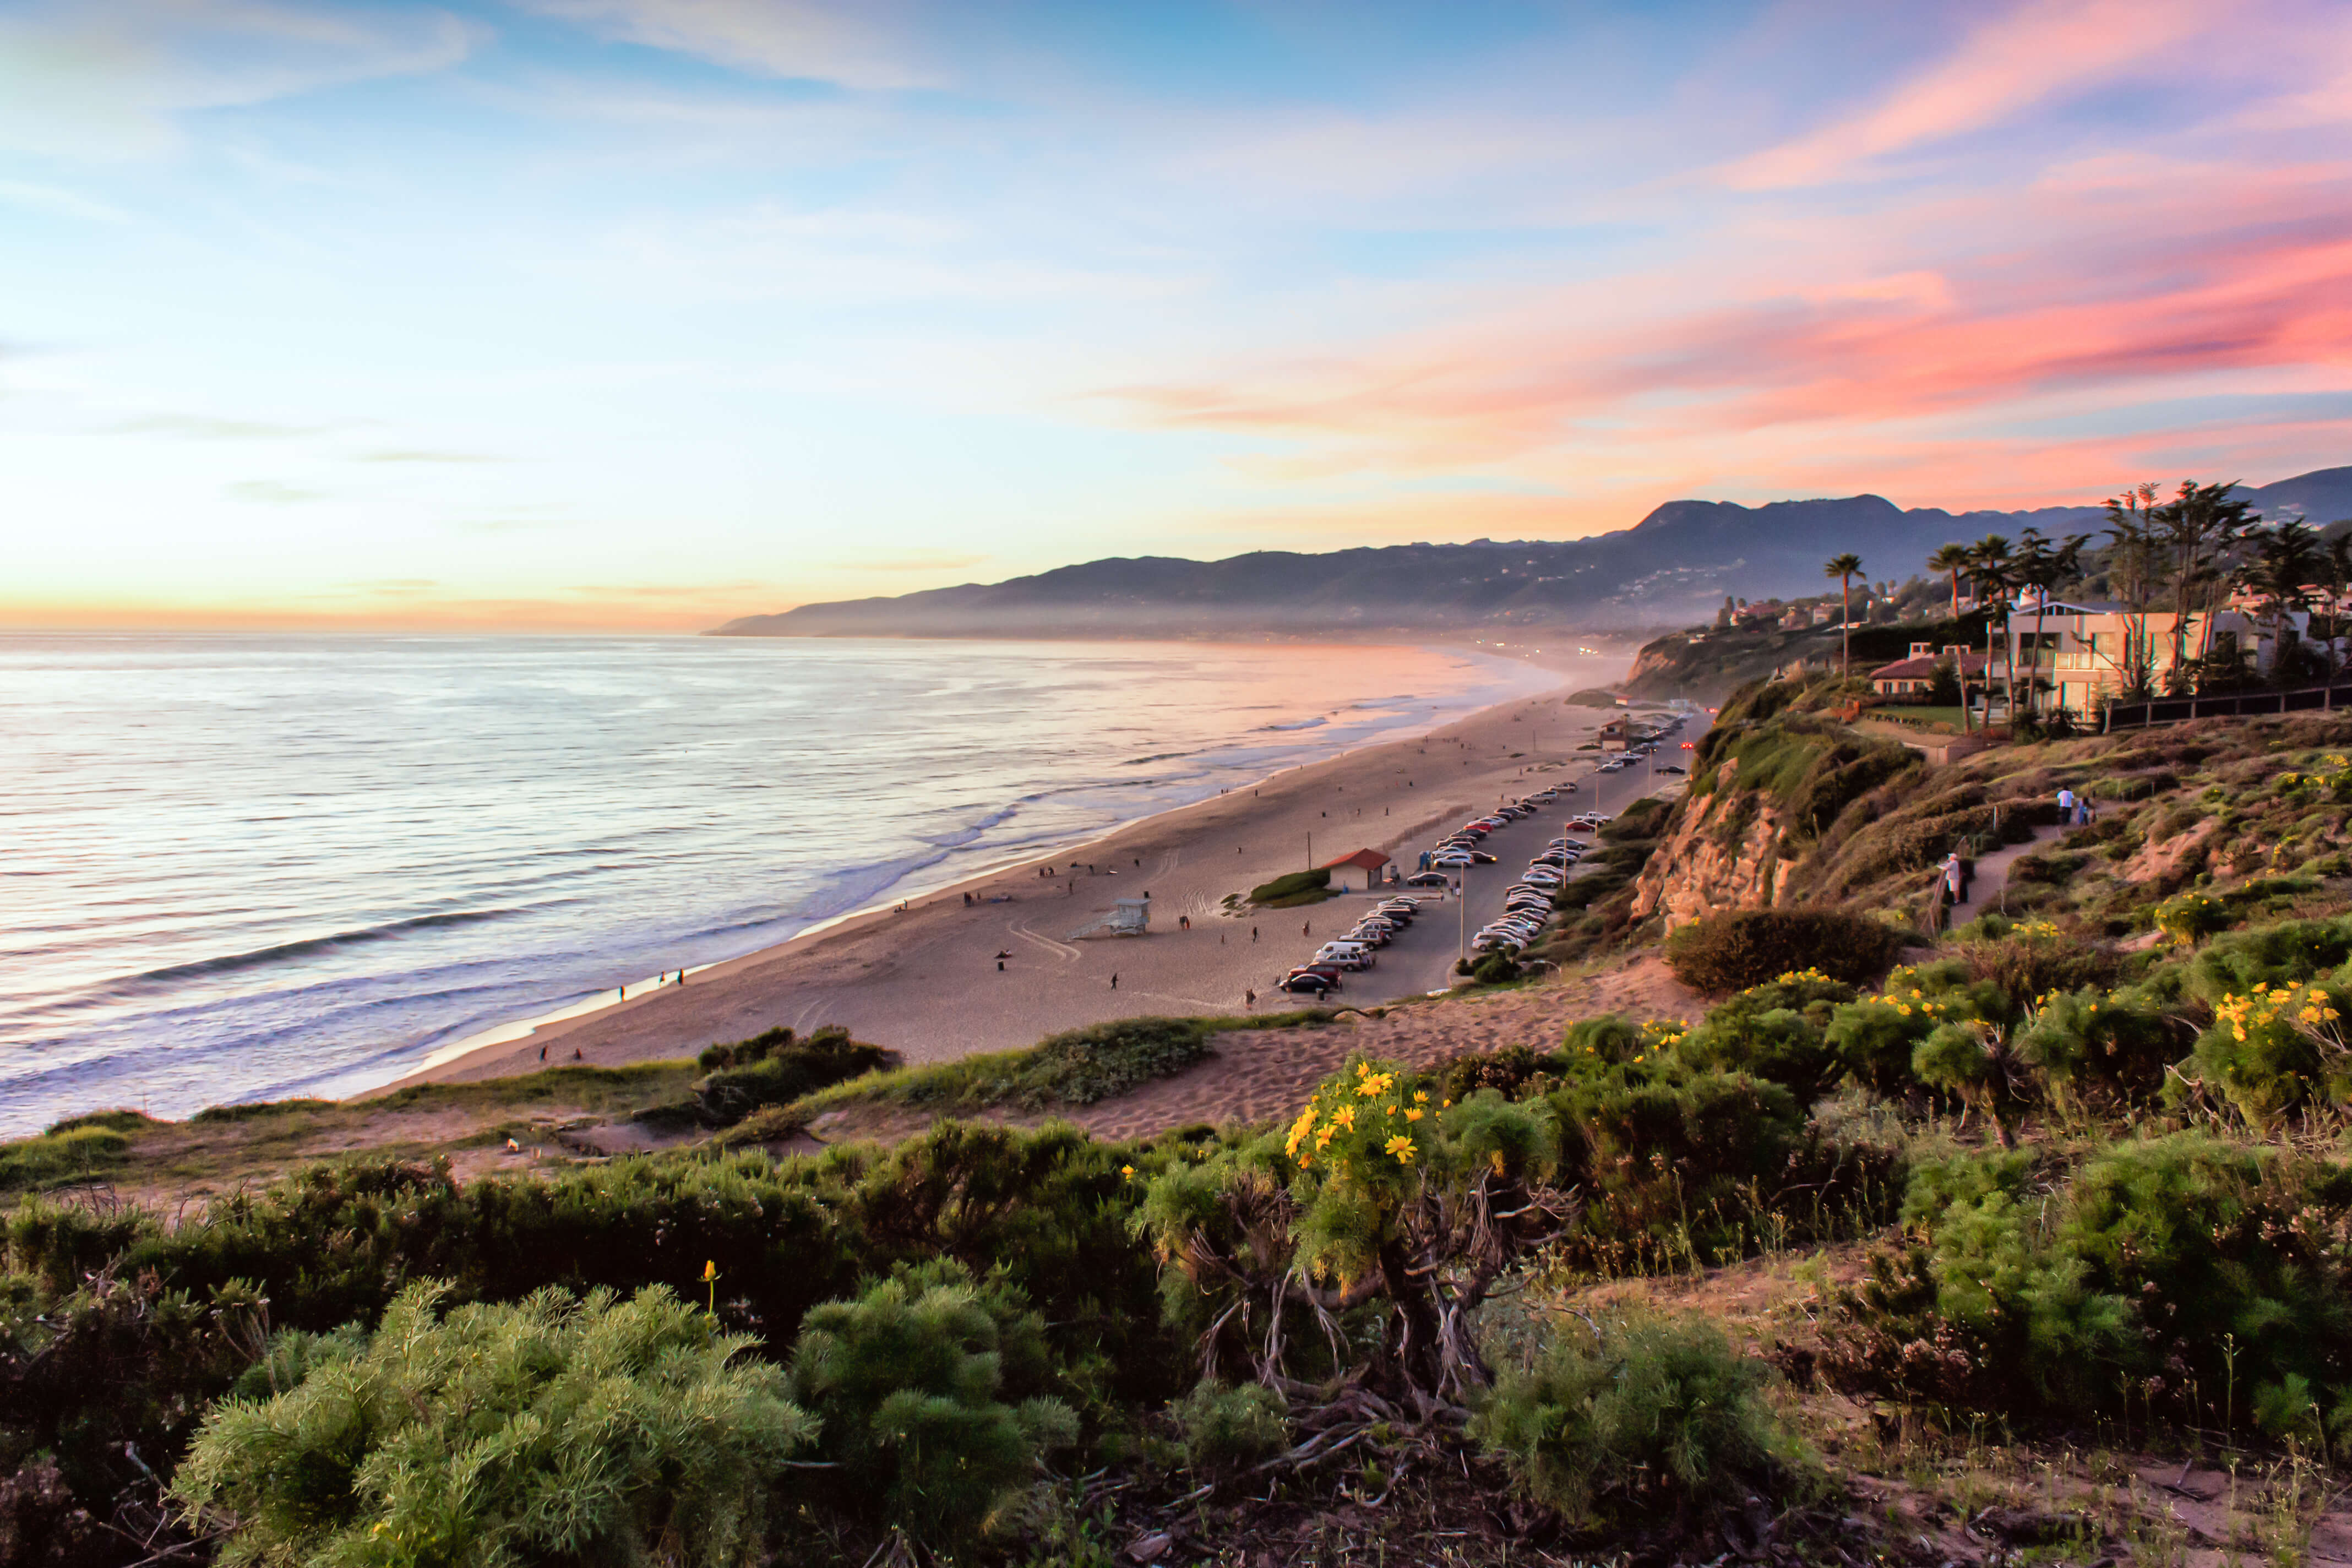 Sunset on the beach of malibu from overlooking grassy cliff